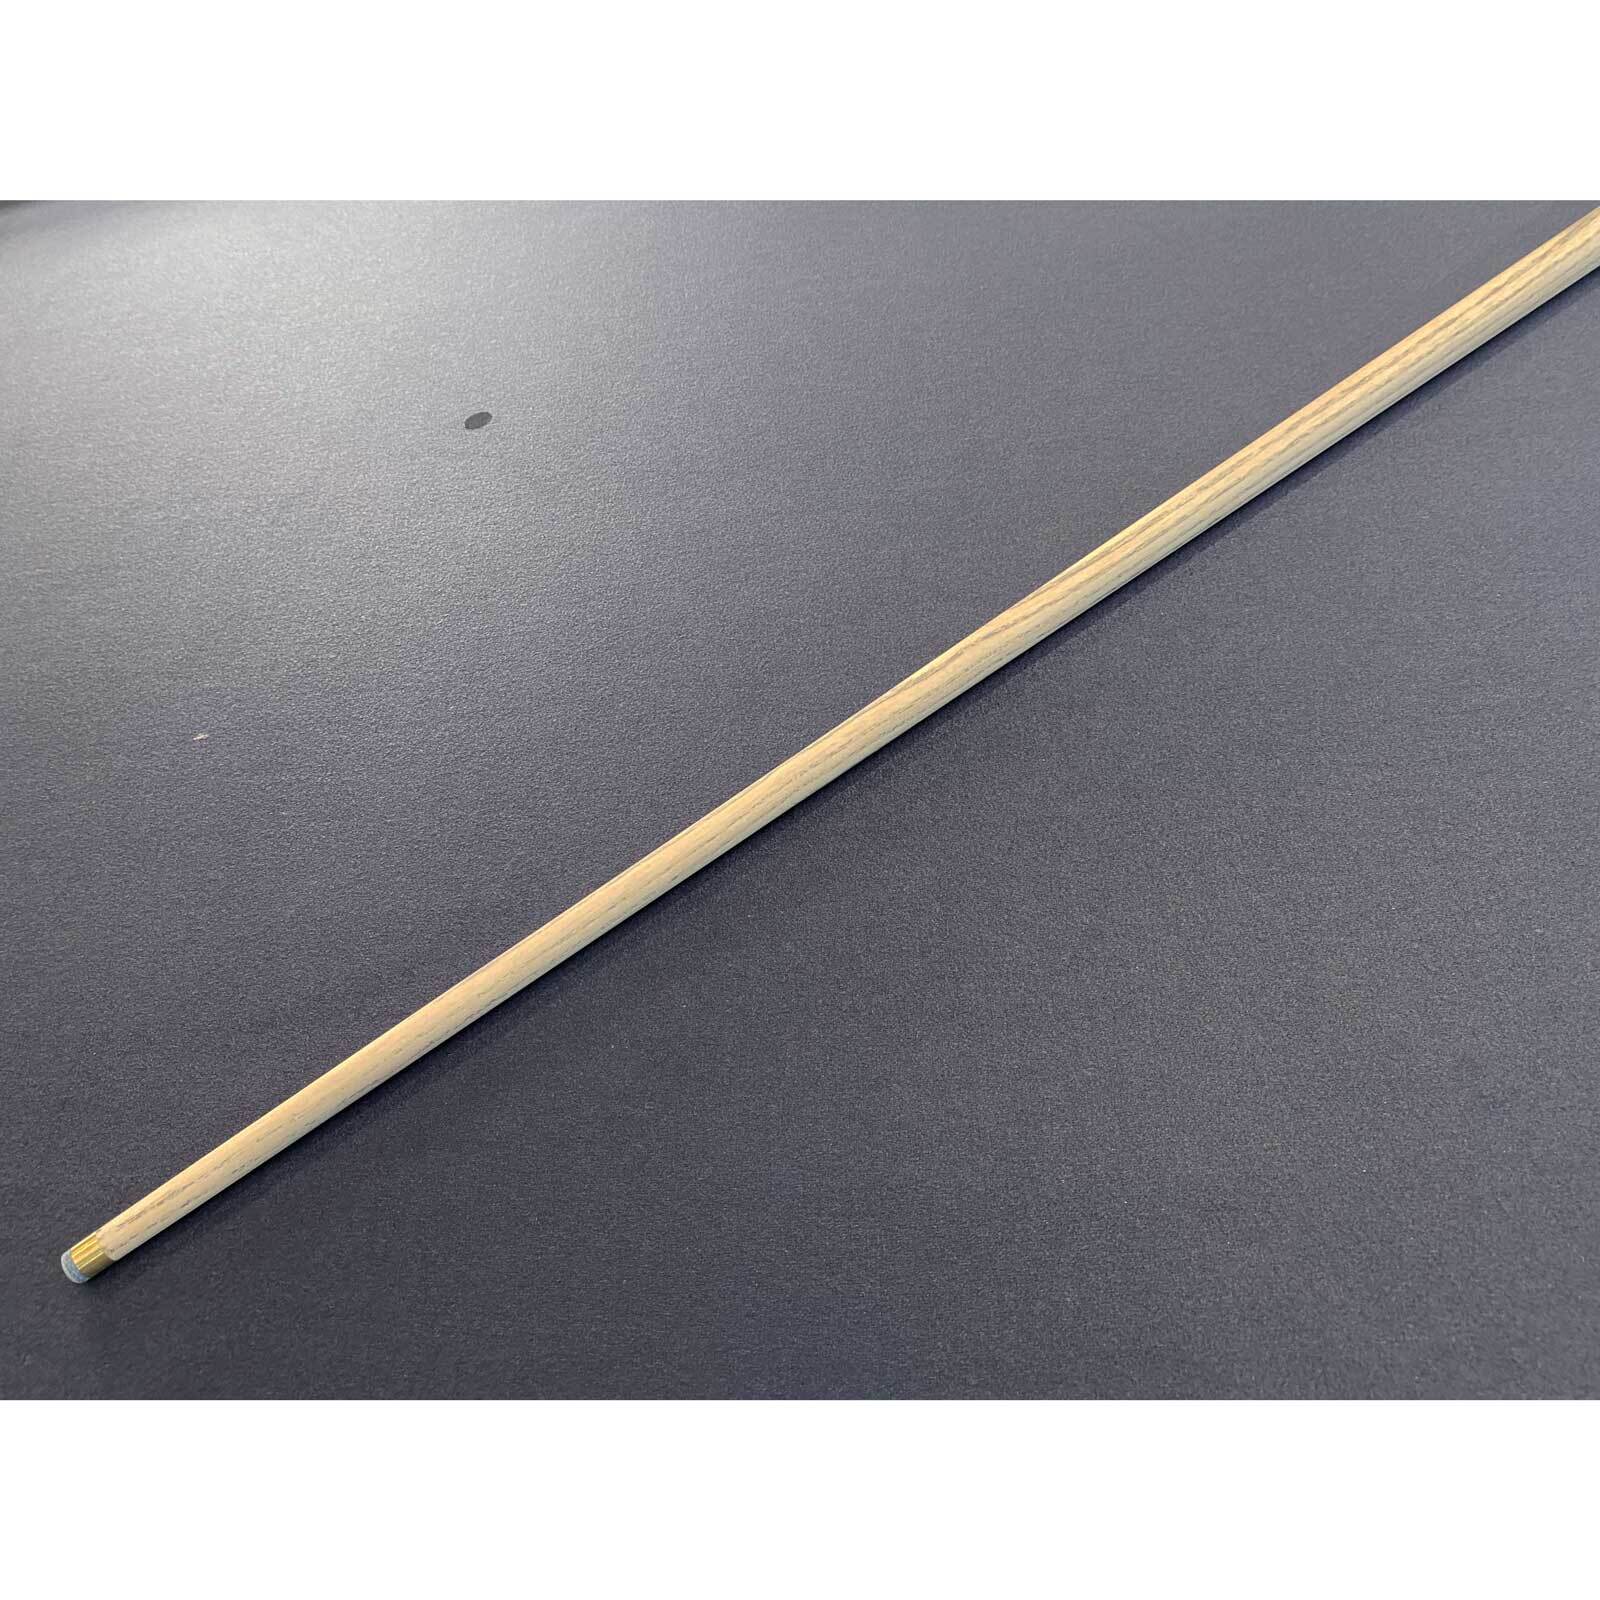 Pool cue value pack, with one 48 inch telescopic cue